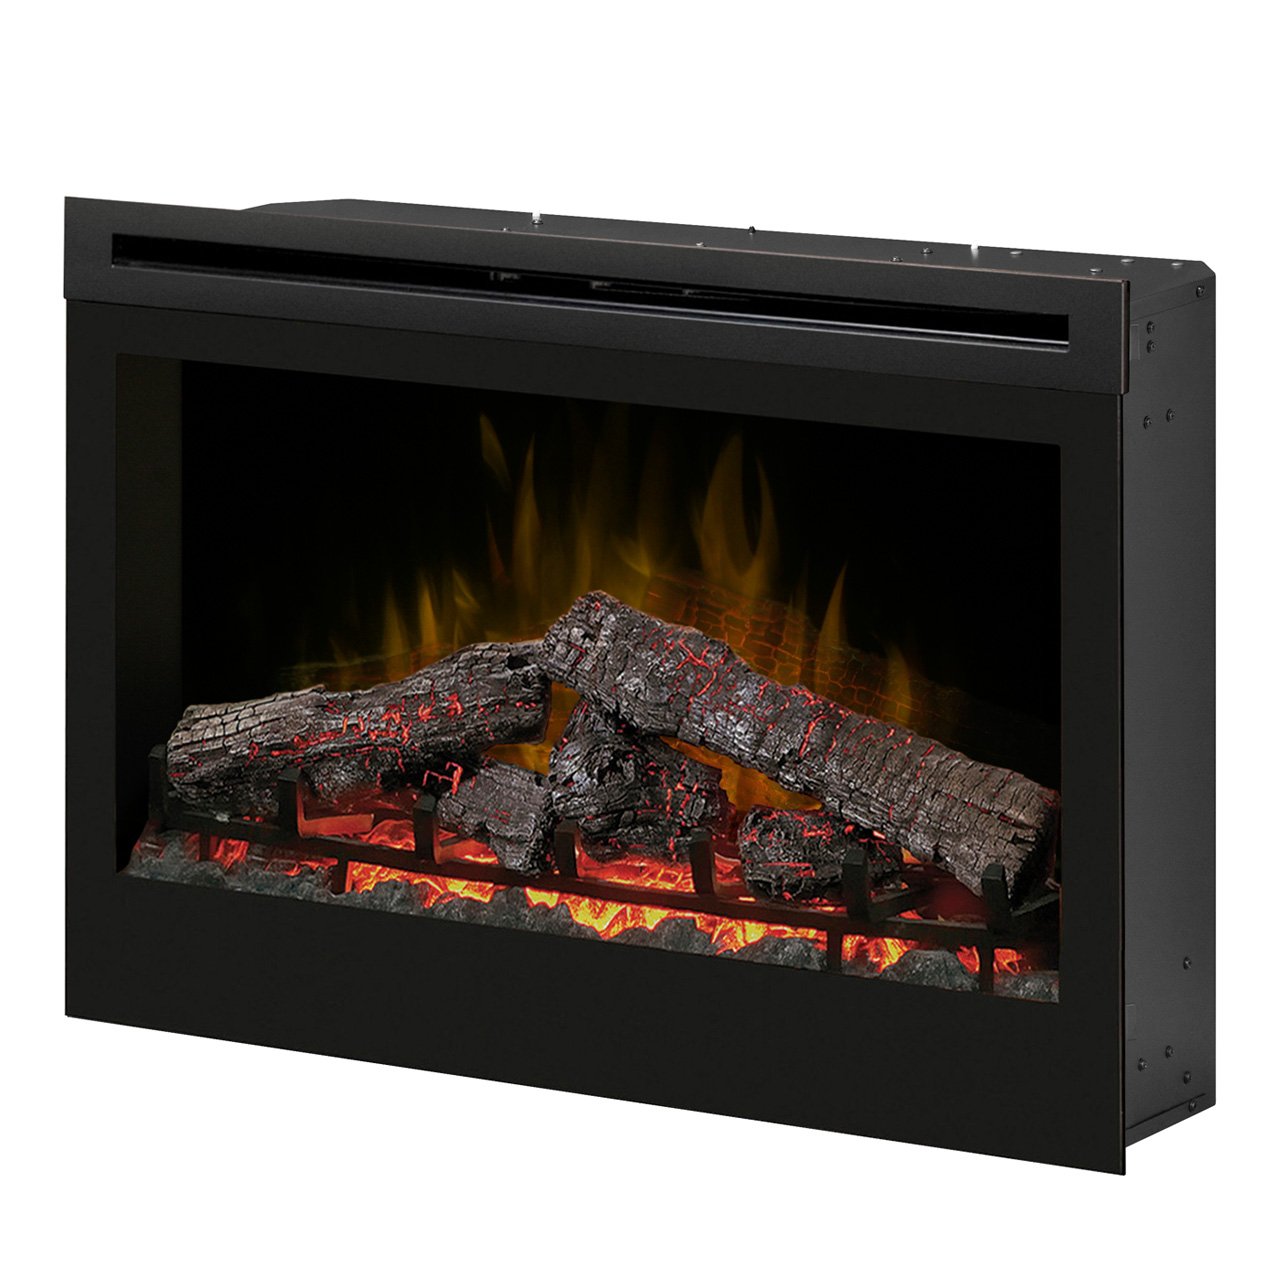 Classic Fireplaces New Dimplex Df3033st 33 Inch Self Trimming Electric Fireplace Insert